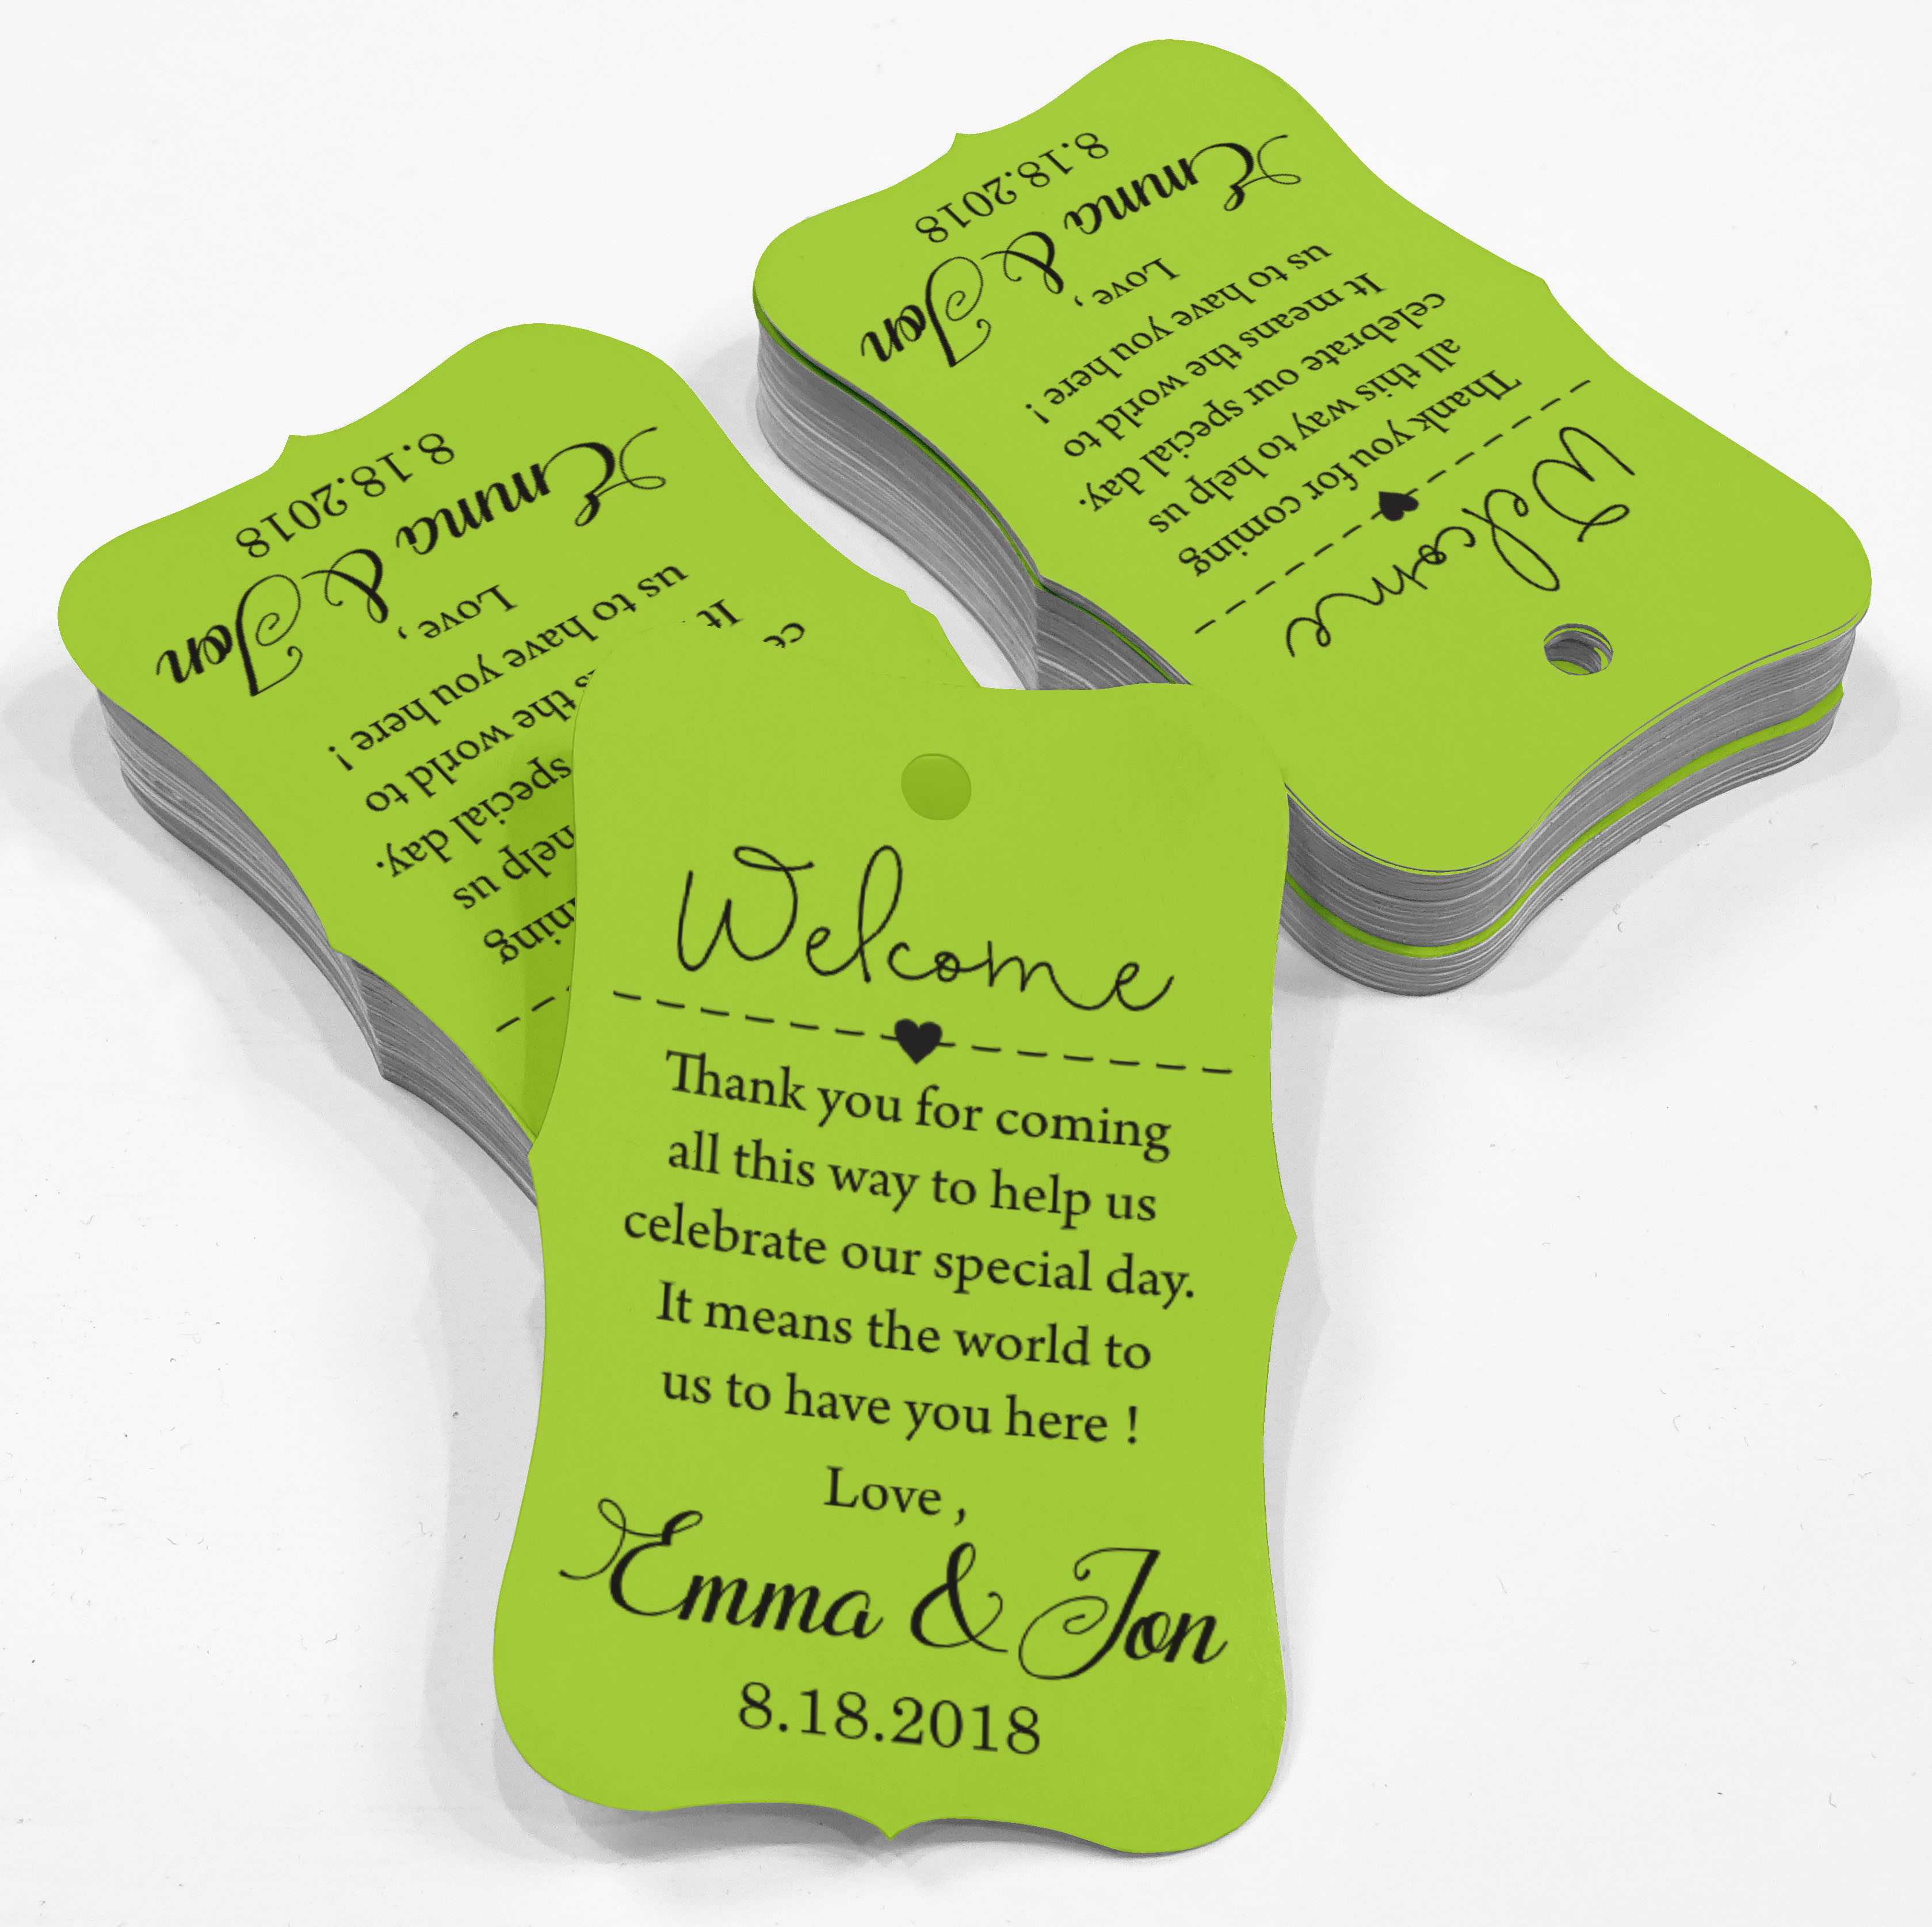 100 PCS Wedding Welcome Personalized Favor Gift Paper Tags Hang-PAR-TAG-20 